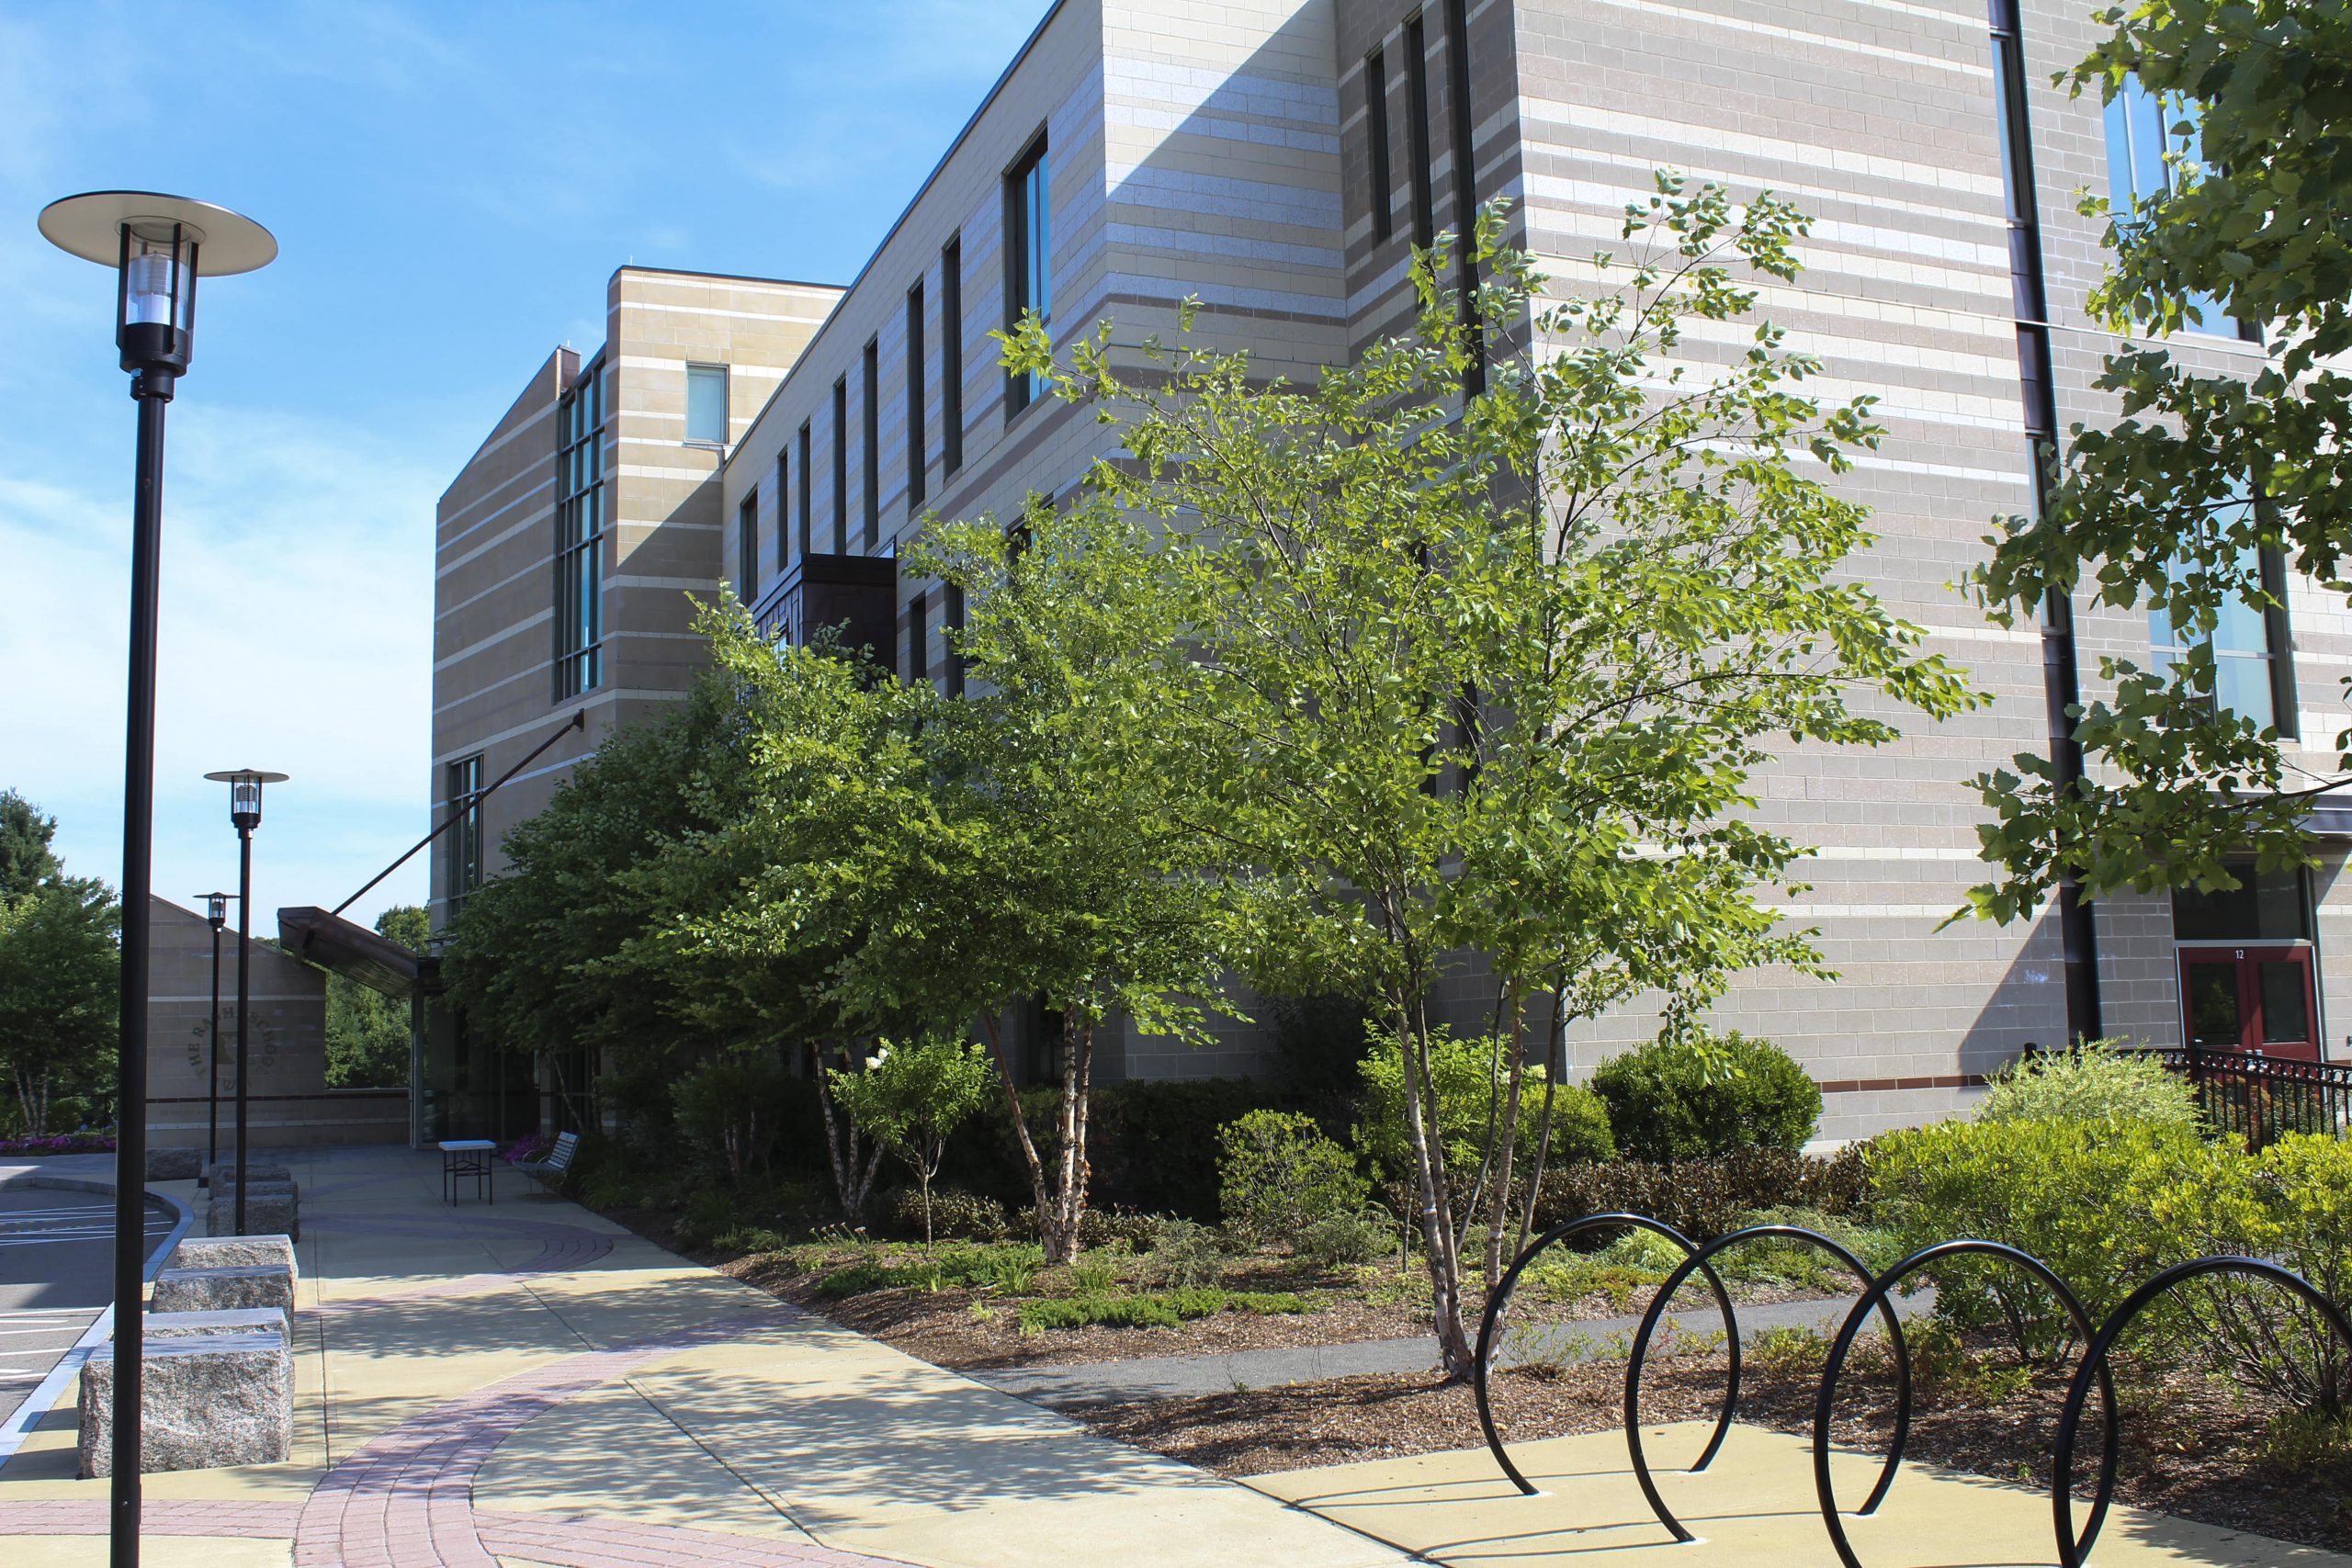 Example of a large-scale commercial project completed by Greenscape.